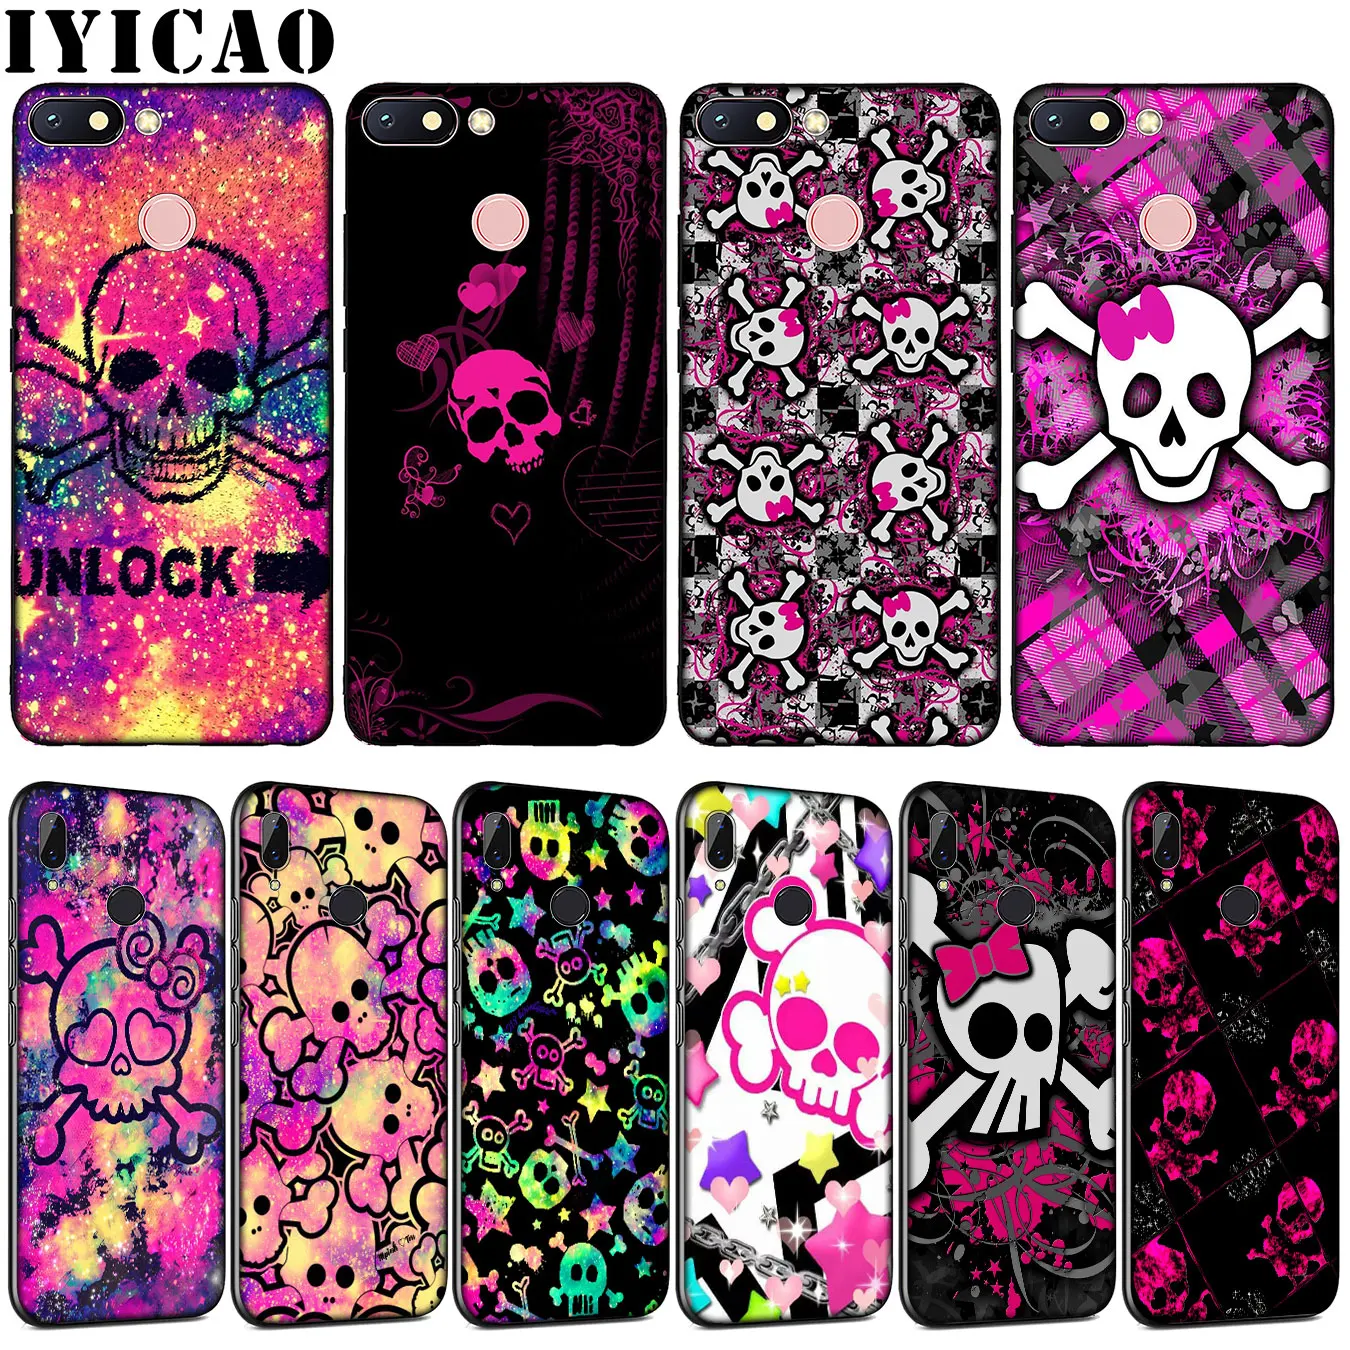 

IYICAO Pink Cute Skull Soft TPU Silicone Phone Case for Xiaomi Redmi K20 S2 GO 7A 6A 5A 5 Plus 4A 4X Note 8 7 6 Pro Cover